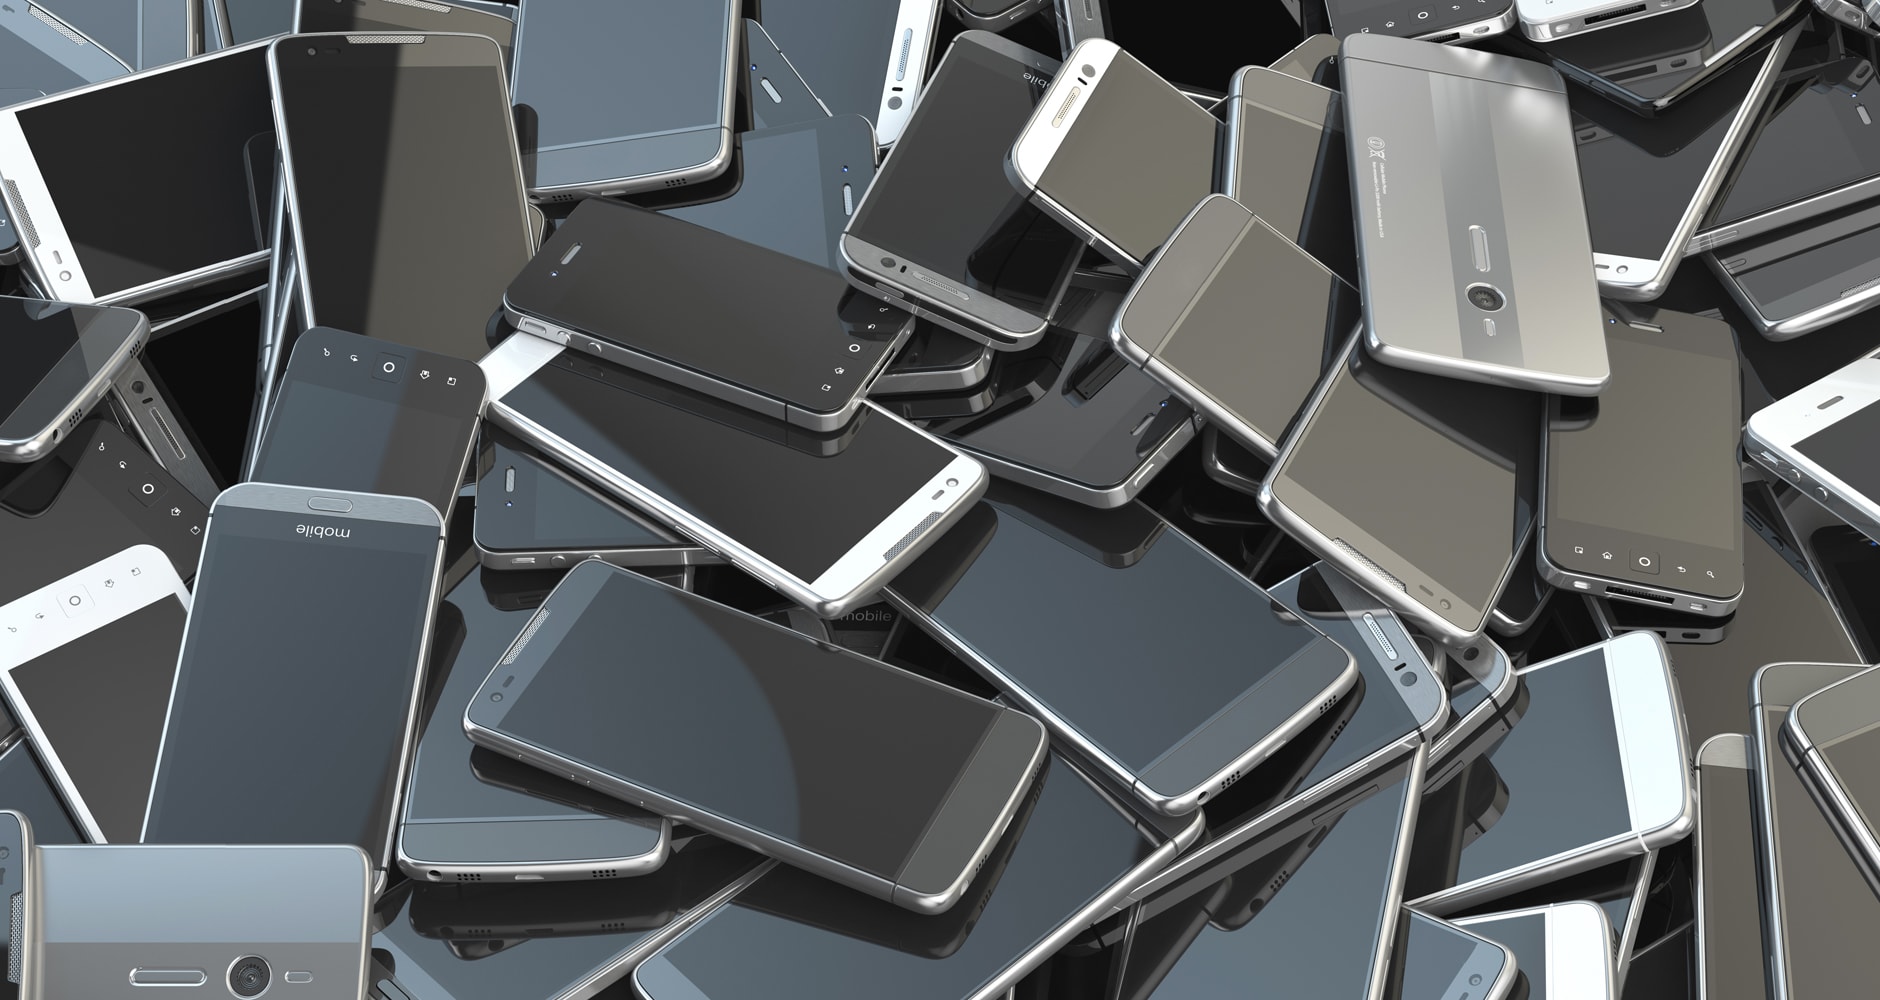 recycle electronics - a pile of old smart phones